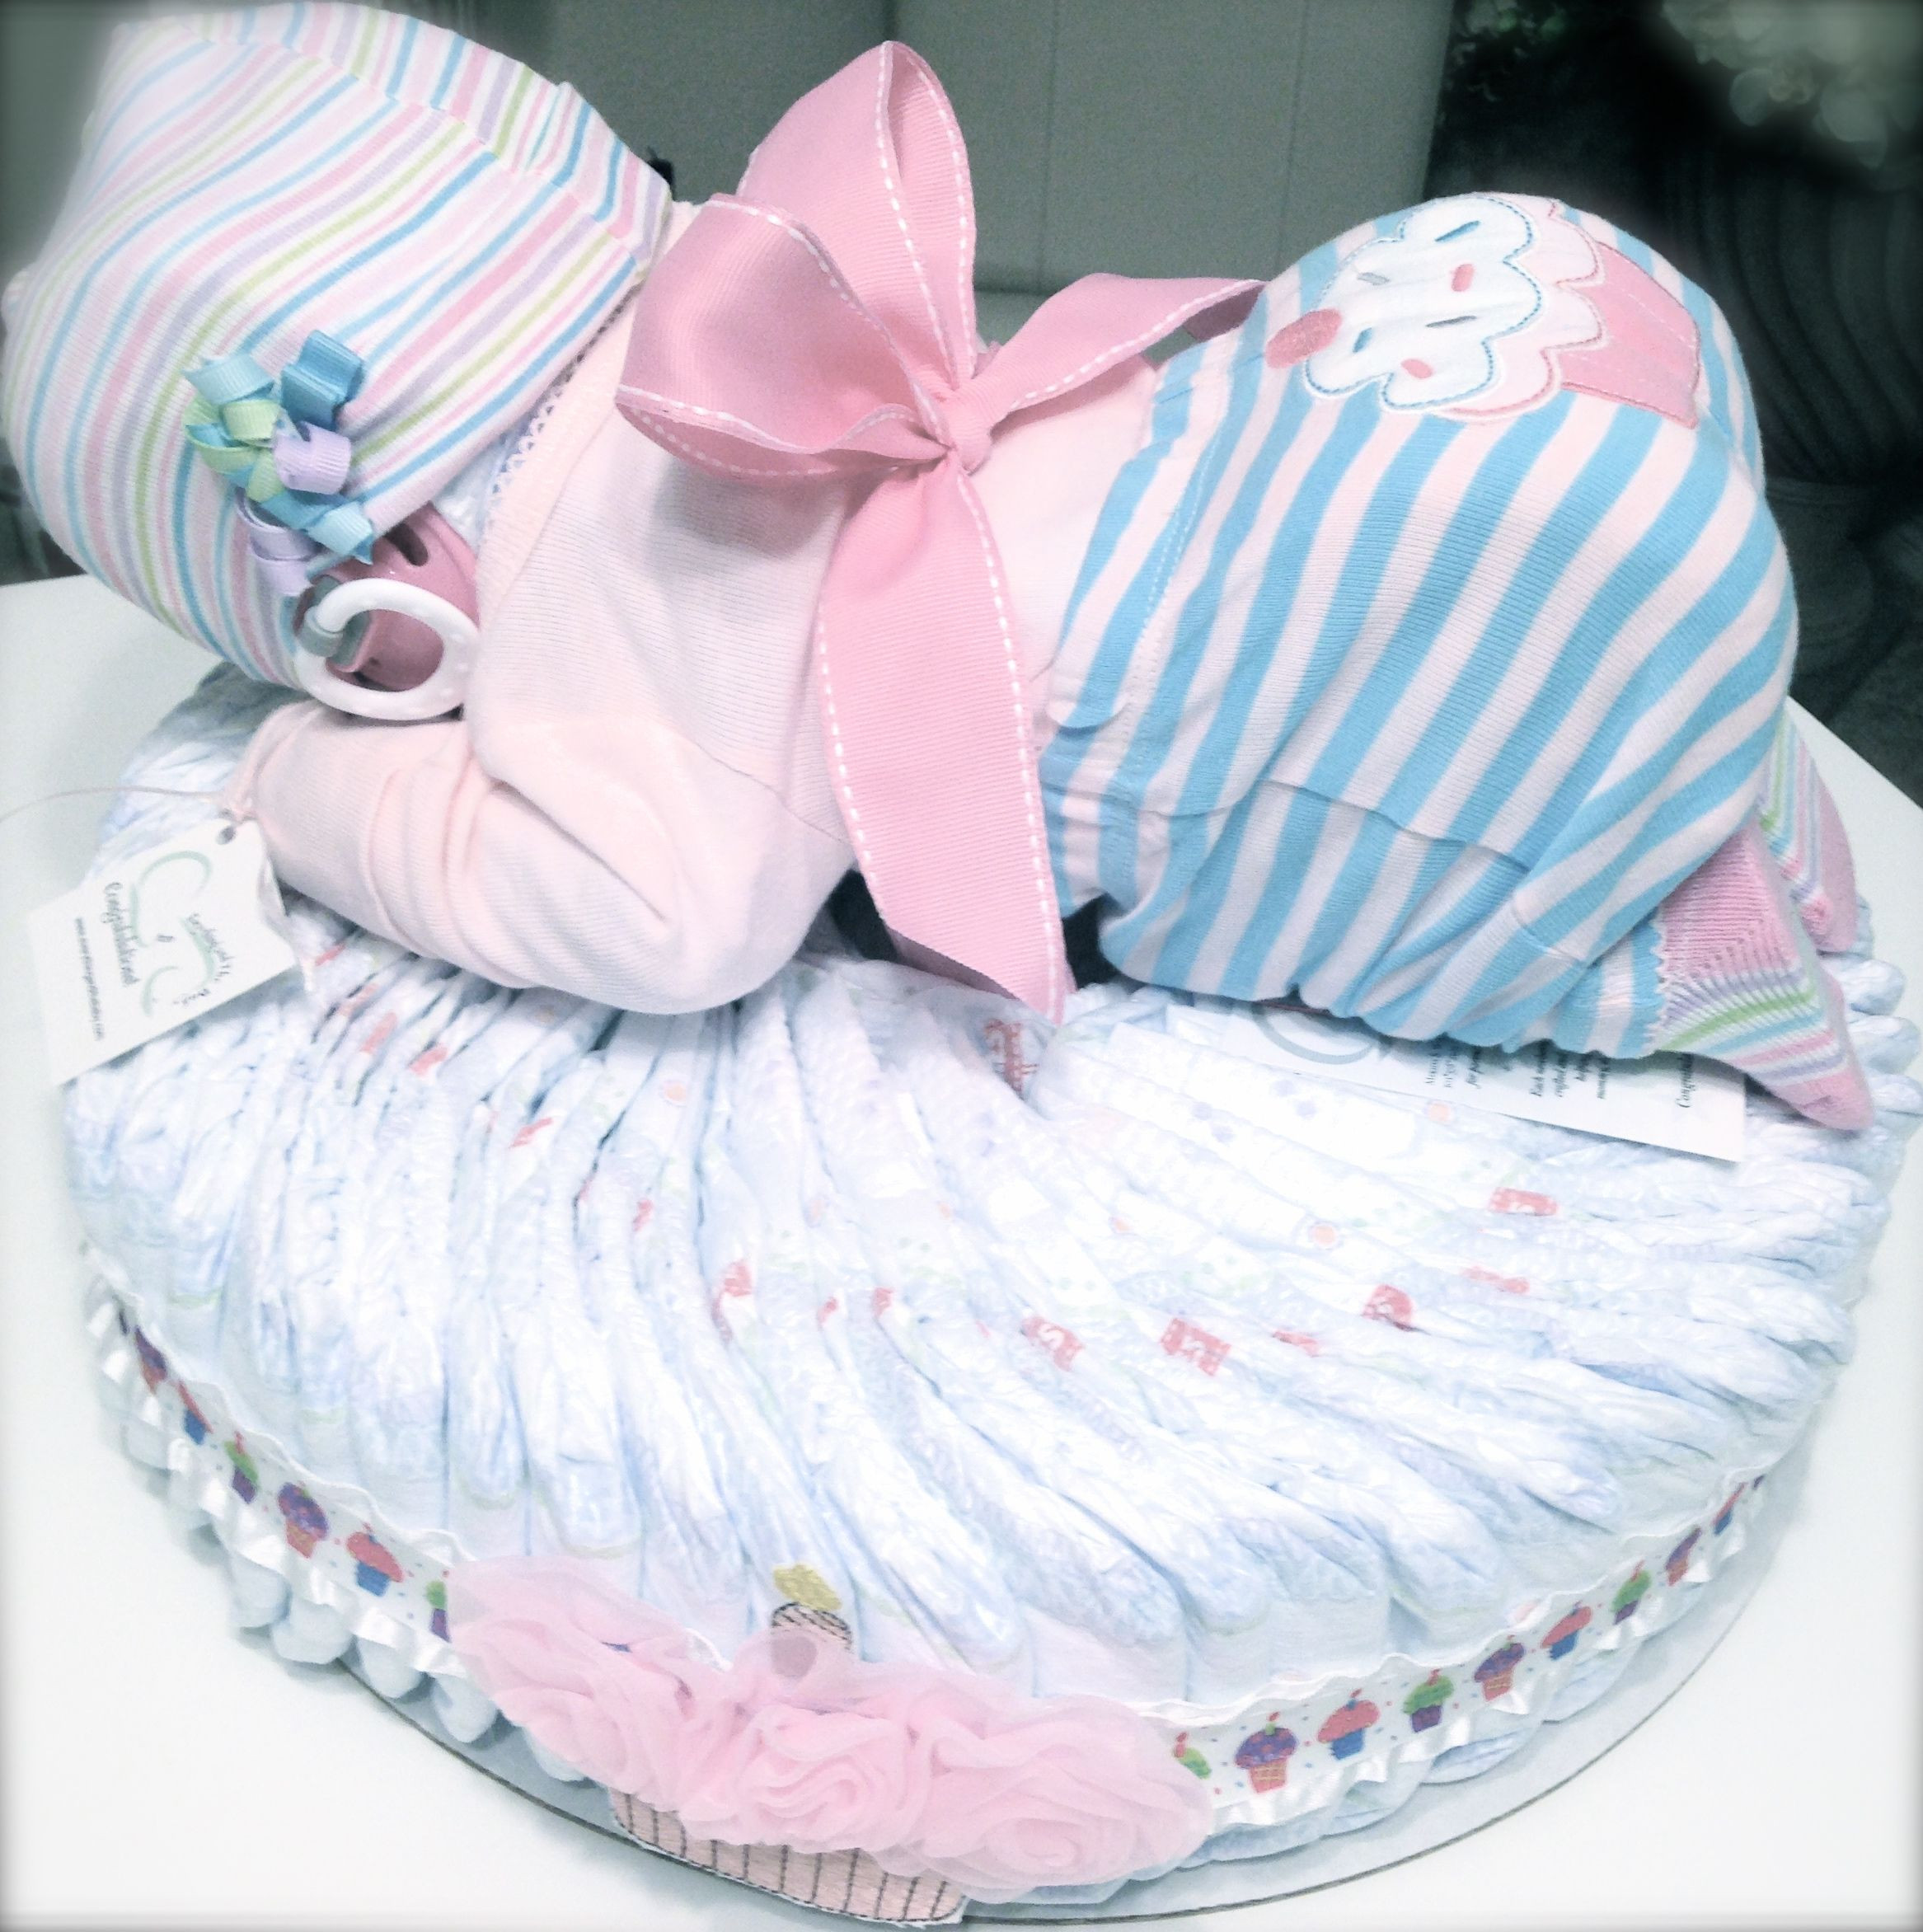 Diaper Gift Ideas For Baby Shower
 Custom Lil Cupcake Diaper Baby Cake Perfect for a baby